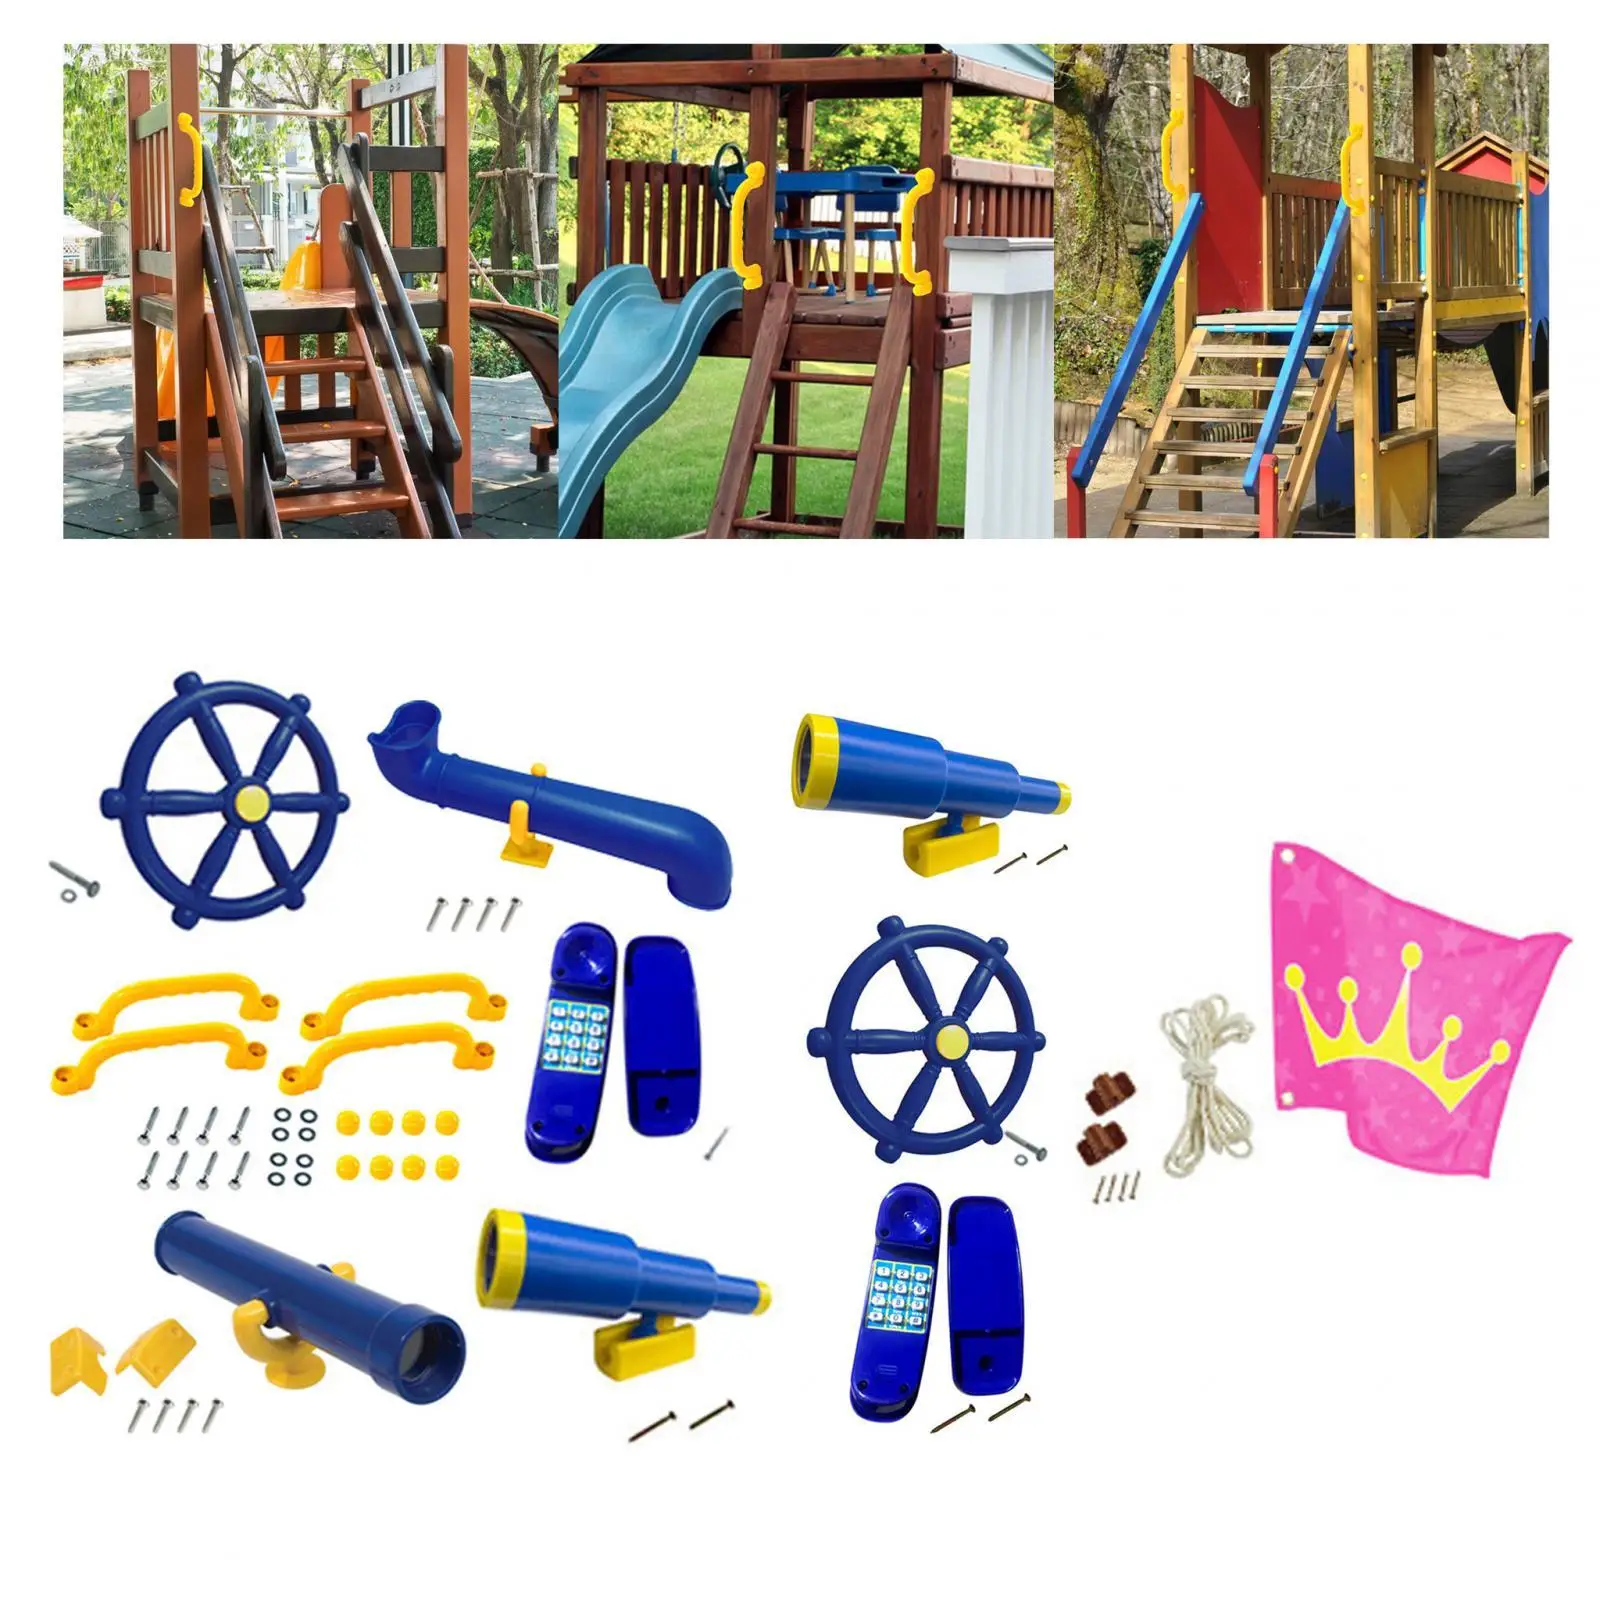 Playground Equipment Easy to Install Swing Set Attachments for Backyard Tree House Play House Holiday Gifts